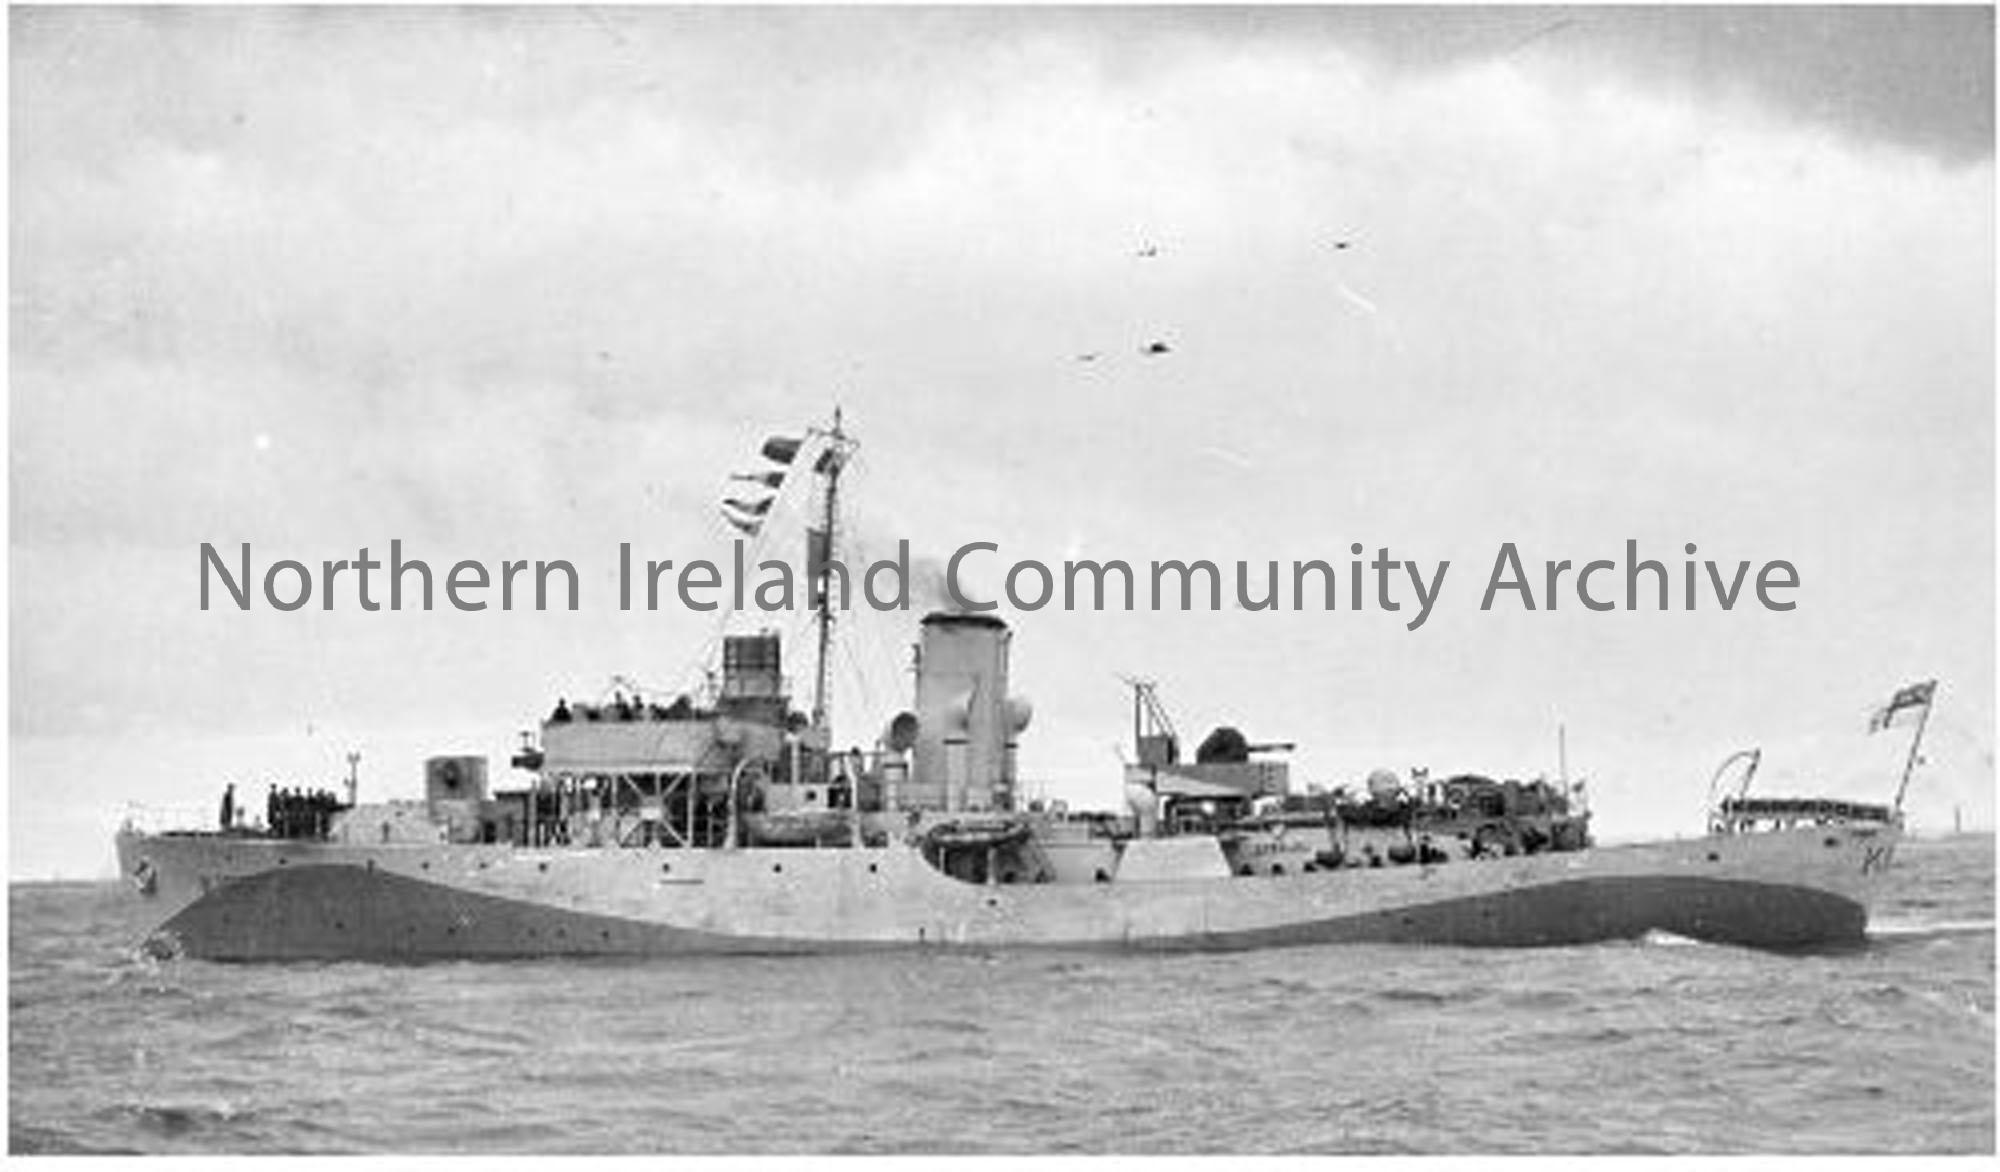 HMS Cowslip
K 196  
Ship number 1105
Launched 28 May, 1941  
Commissioned 9 Aug, 1941 
 (1482)